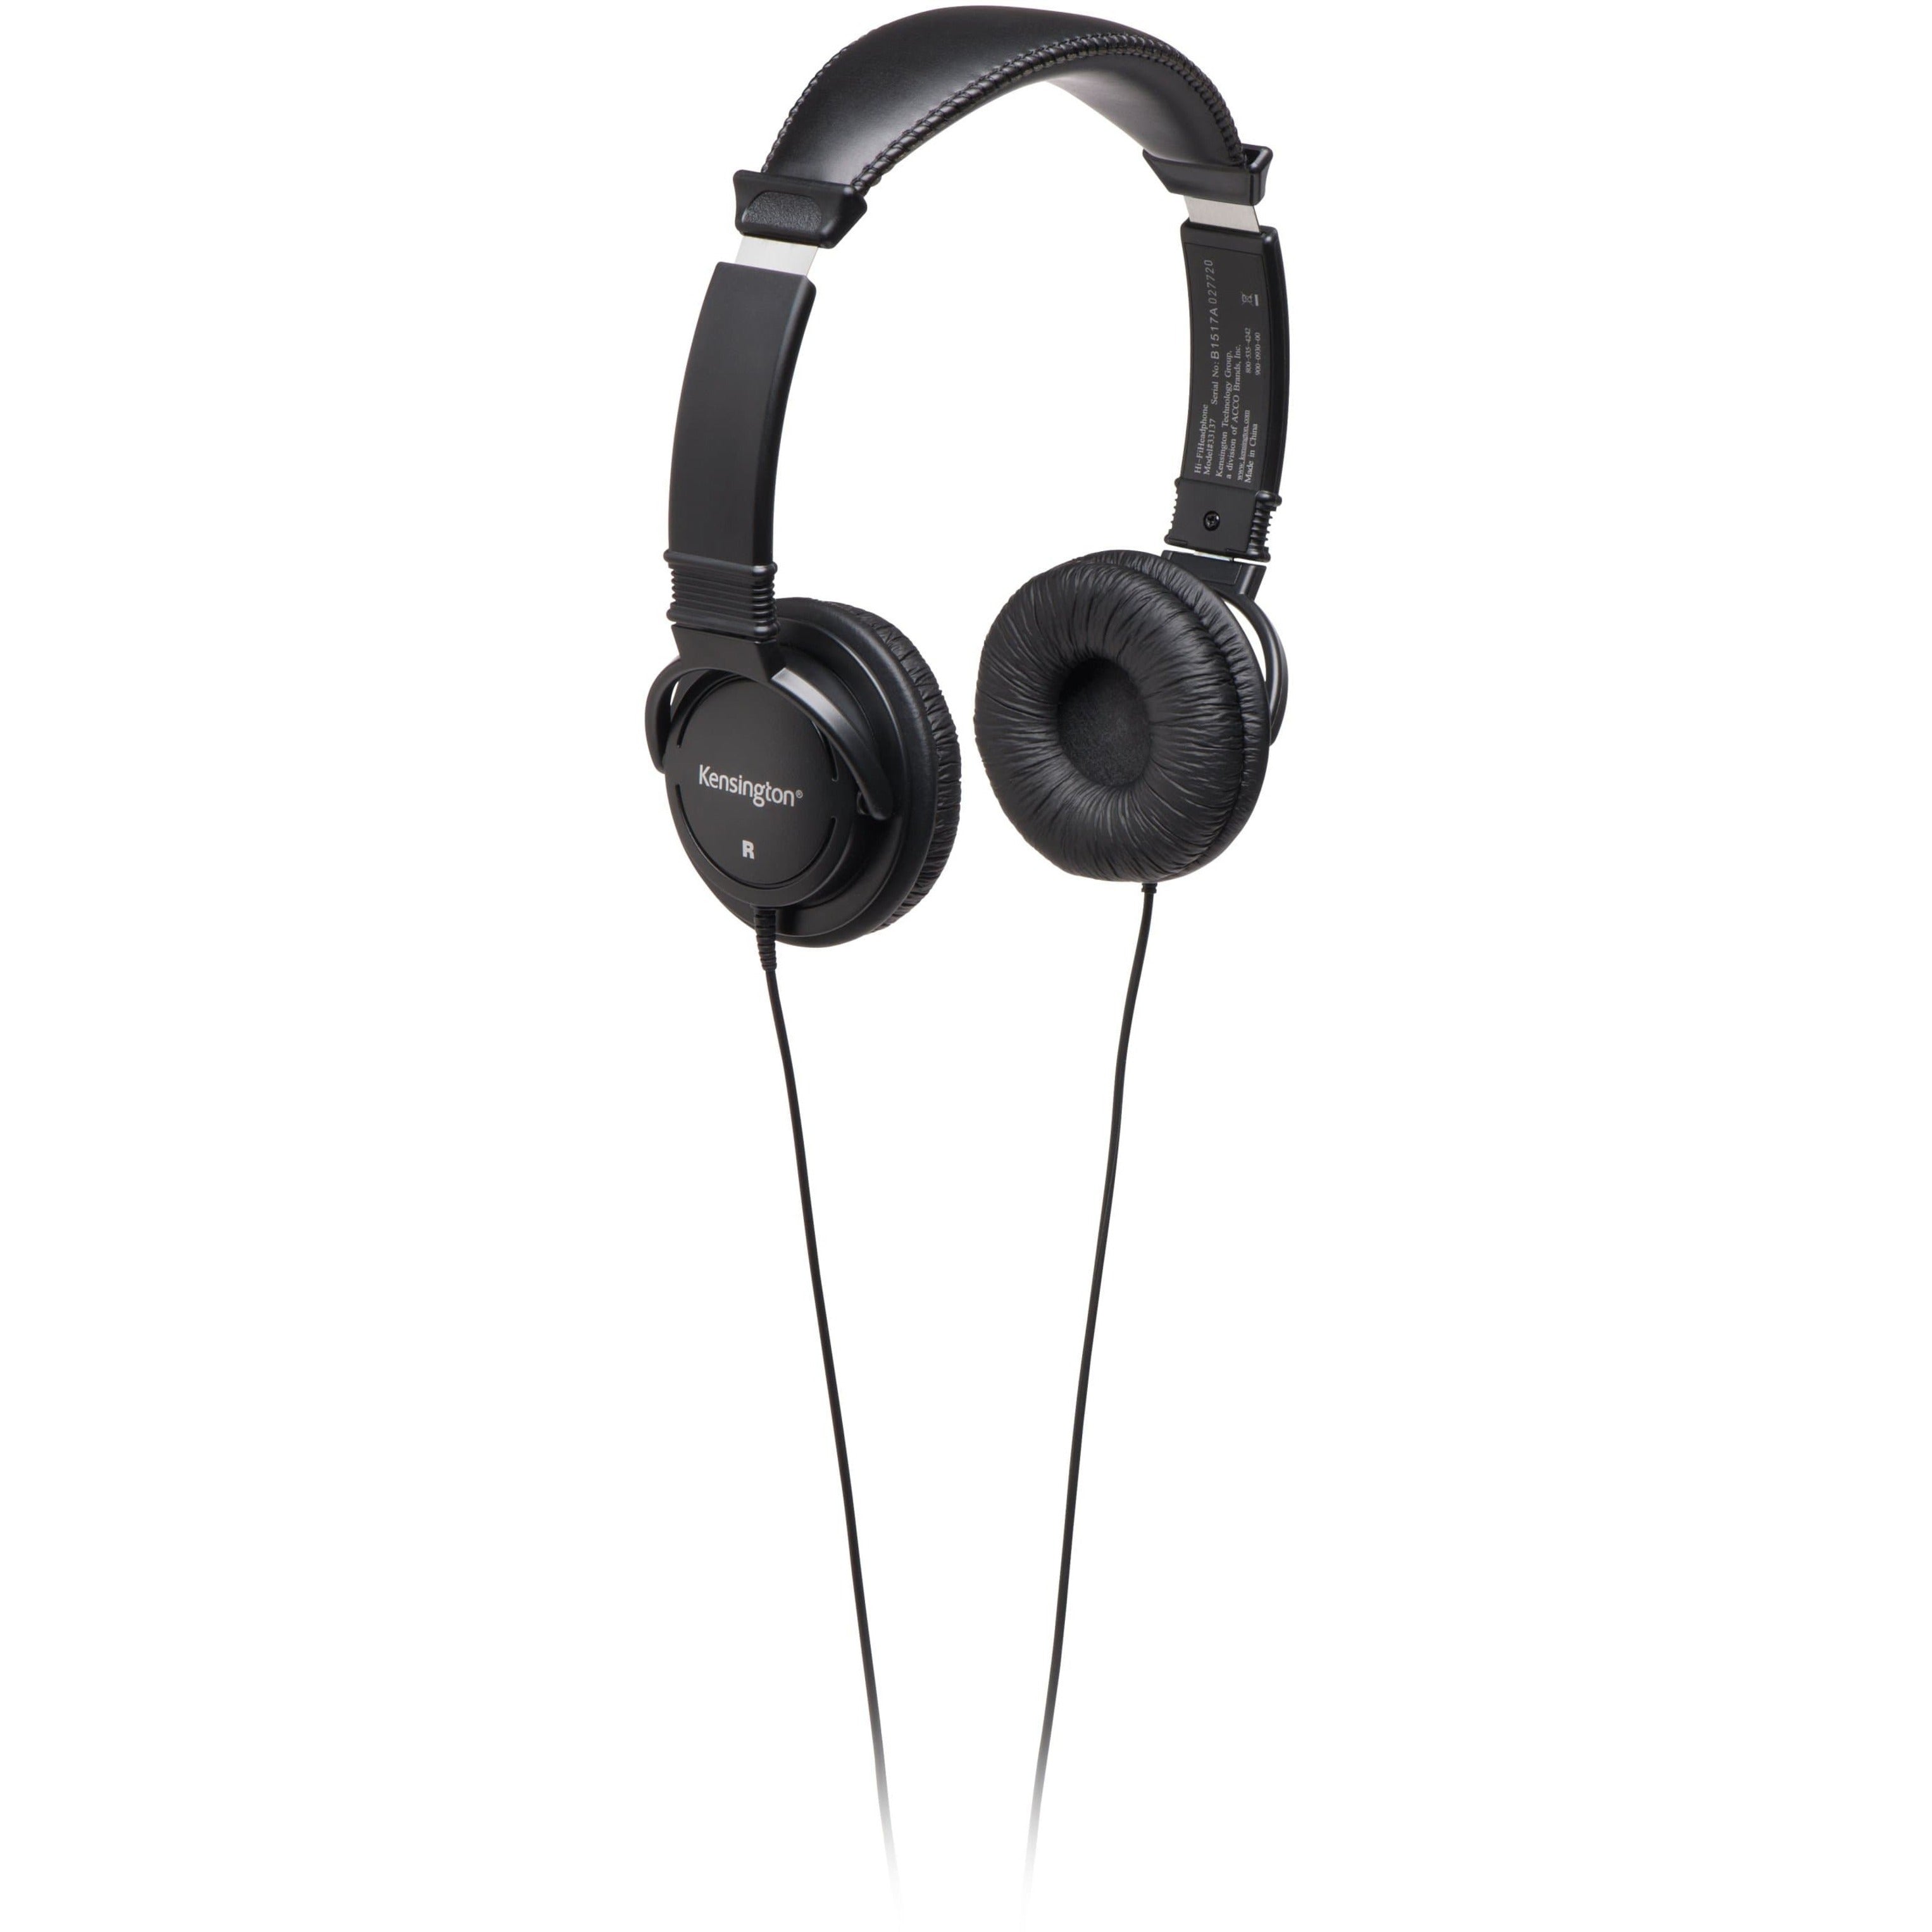 Kensington K33137 Classic 3.5mm Headphone with 9ft cord, Deep Bass, Comfortable, Stereo Sound